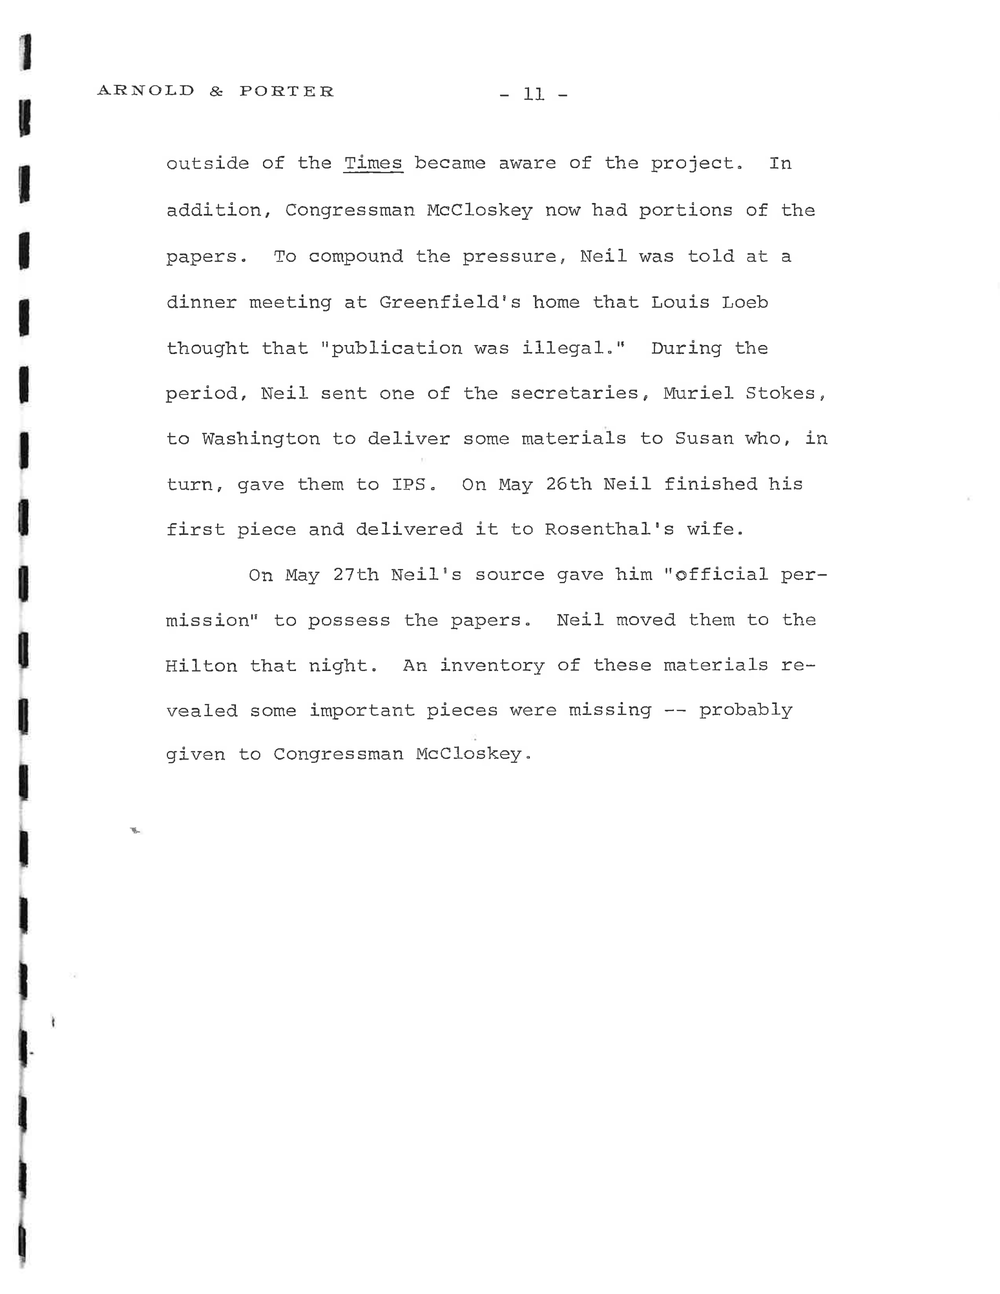 Page 11 from Rogovin Sheehan memo